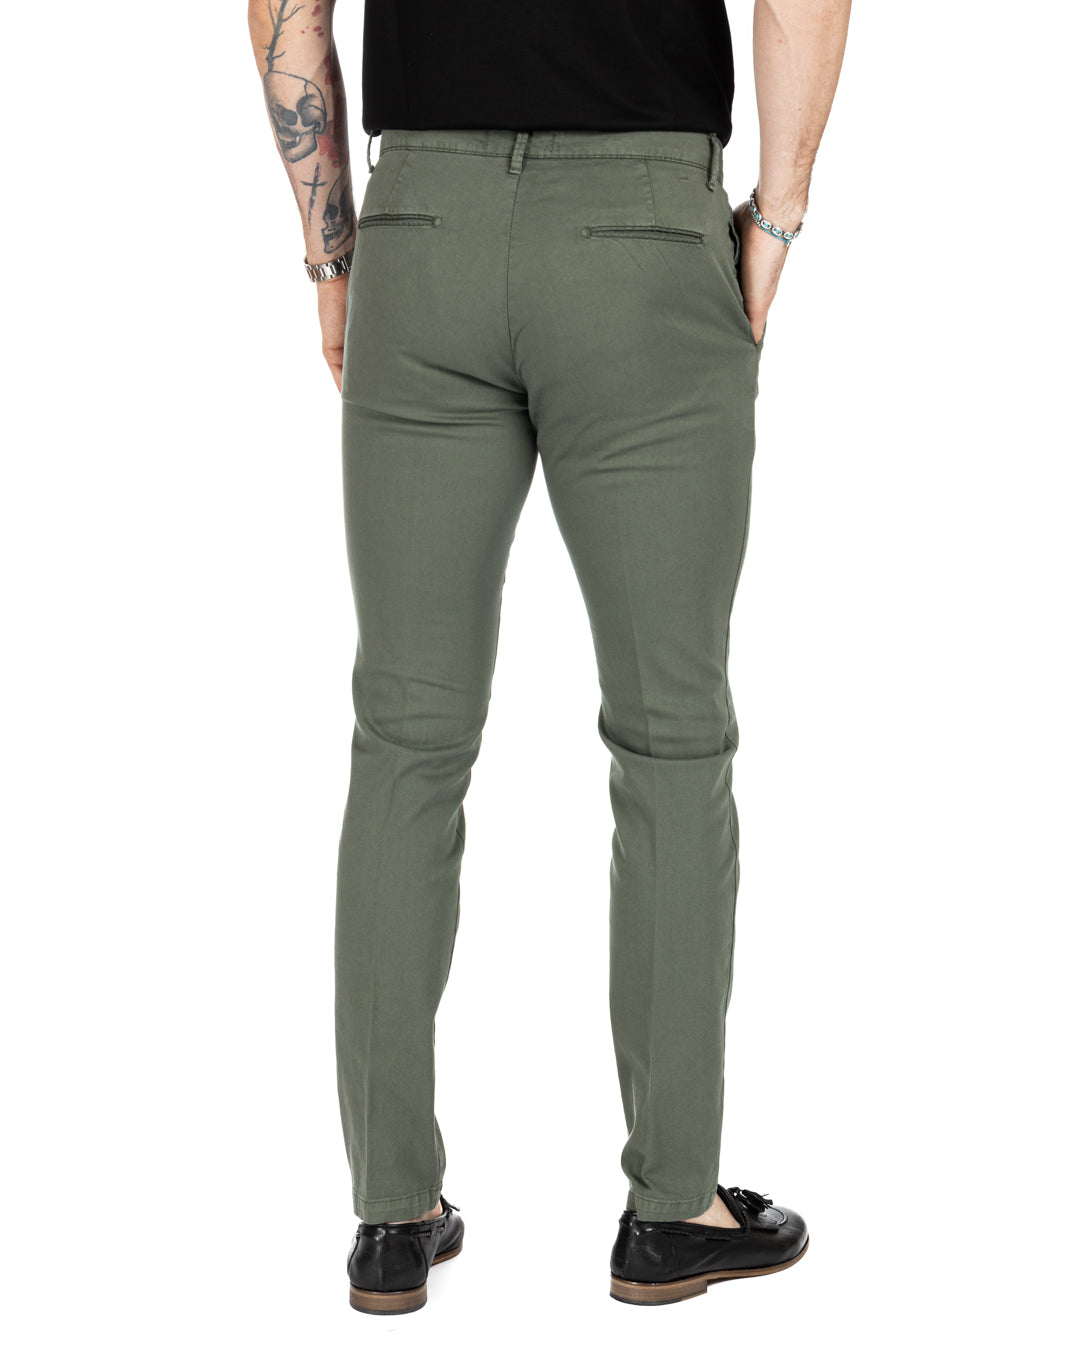 Bill - military armored trousers